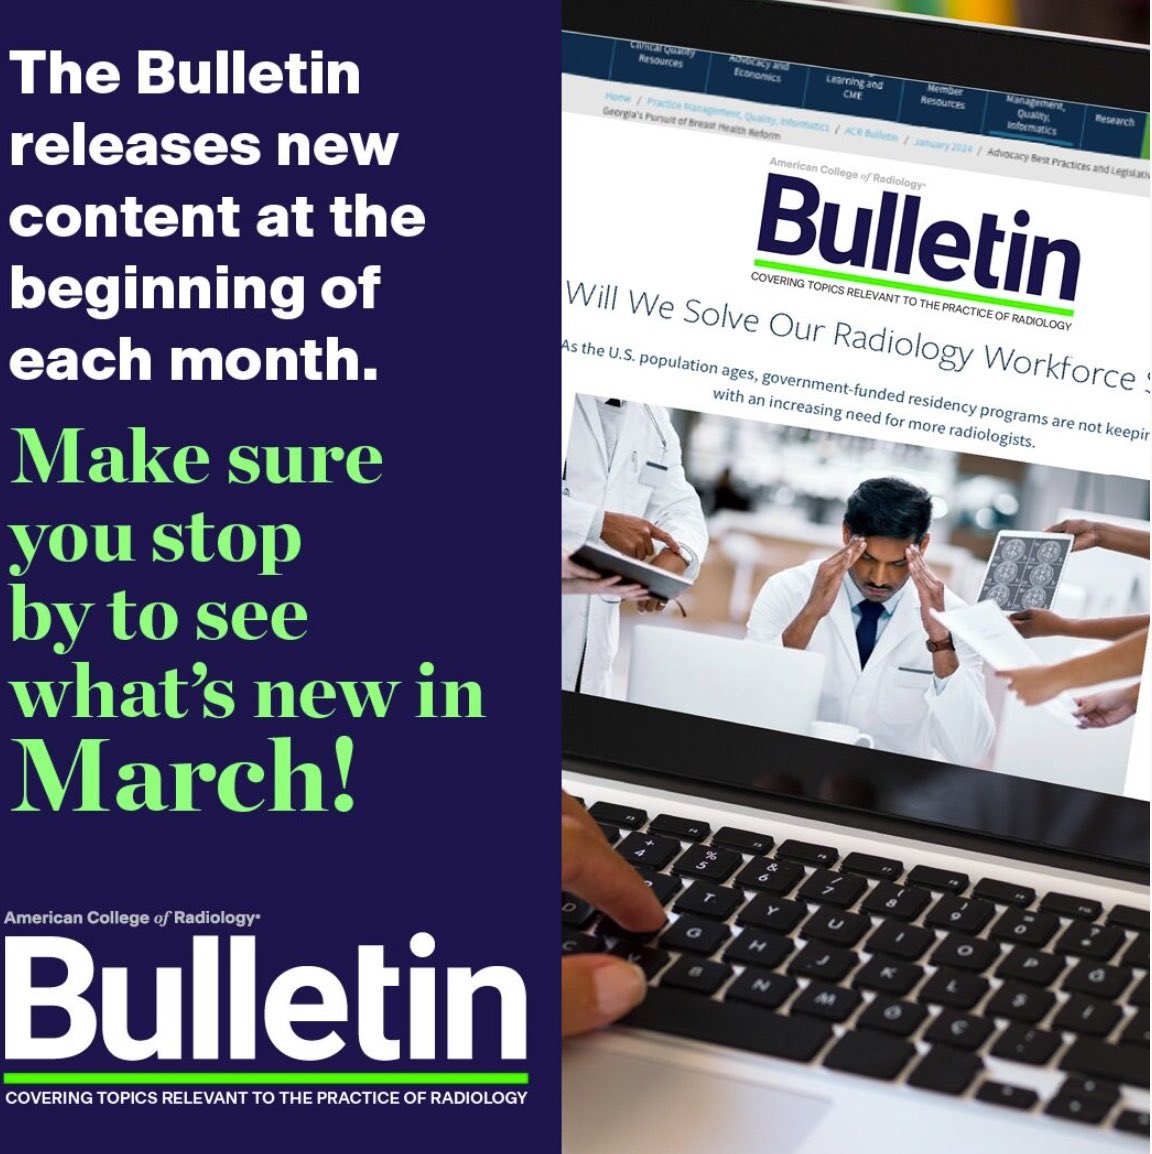 Check out this month's topics, from award recipients to data registries to the radiologist shortage at bit.ly/ACRMarch24. For additional content, check out the #ACRBulletin home page at acr.org/Practice-Manag…. @koolkpmd @amykpatel @ImageScribbler